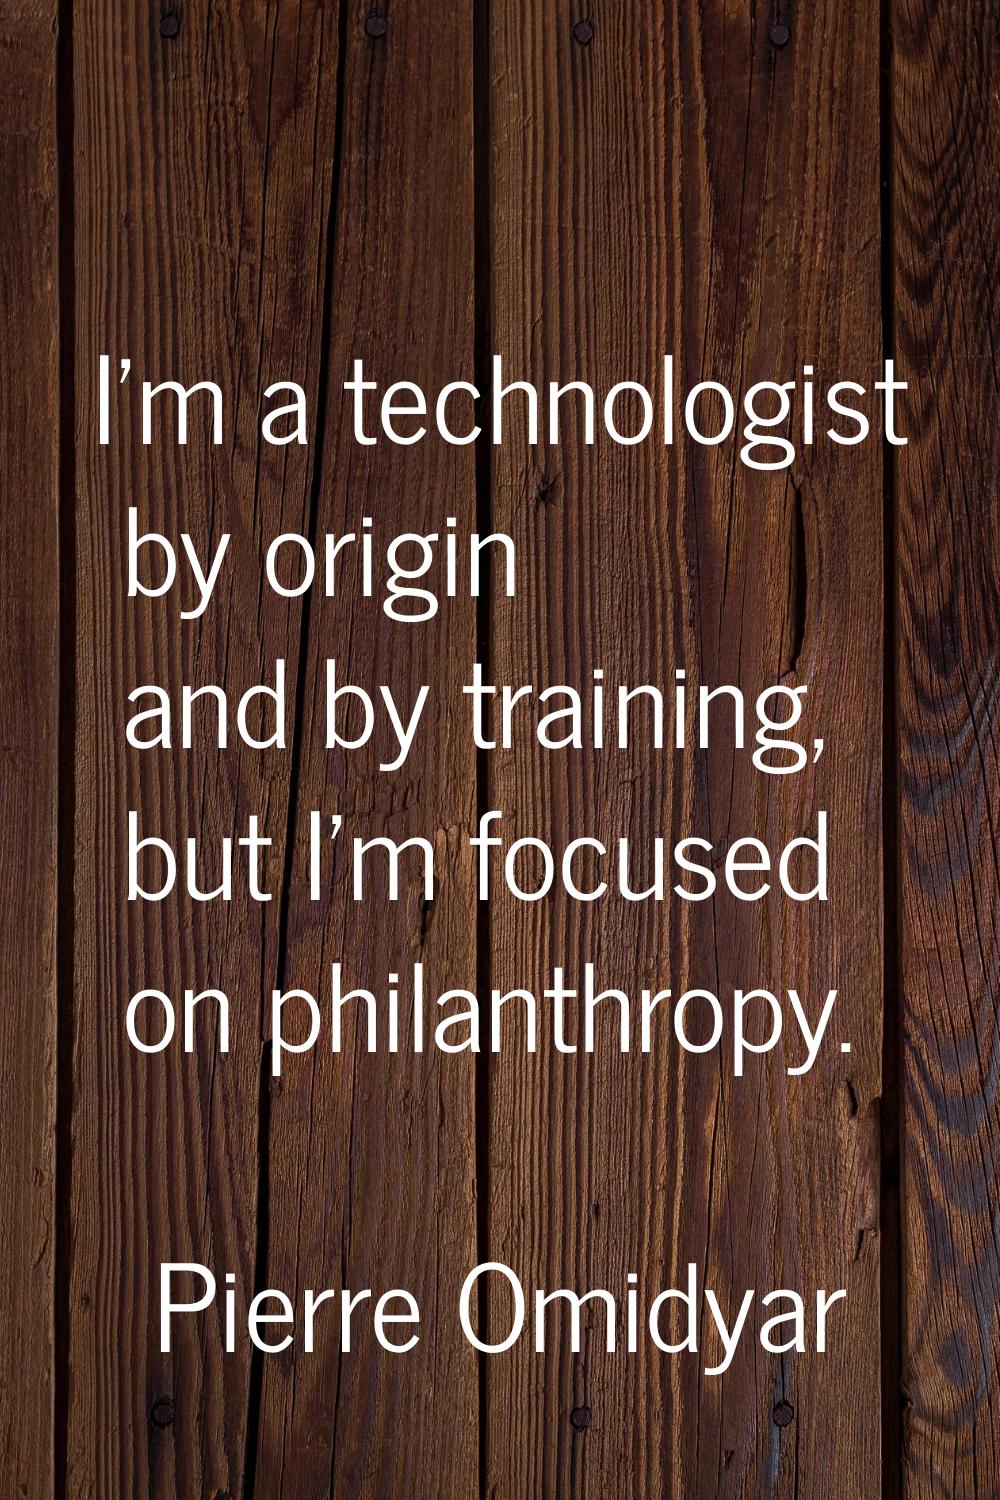 I'm a technologist by origin and by training, but I'm focused on philanthropy.